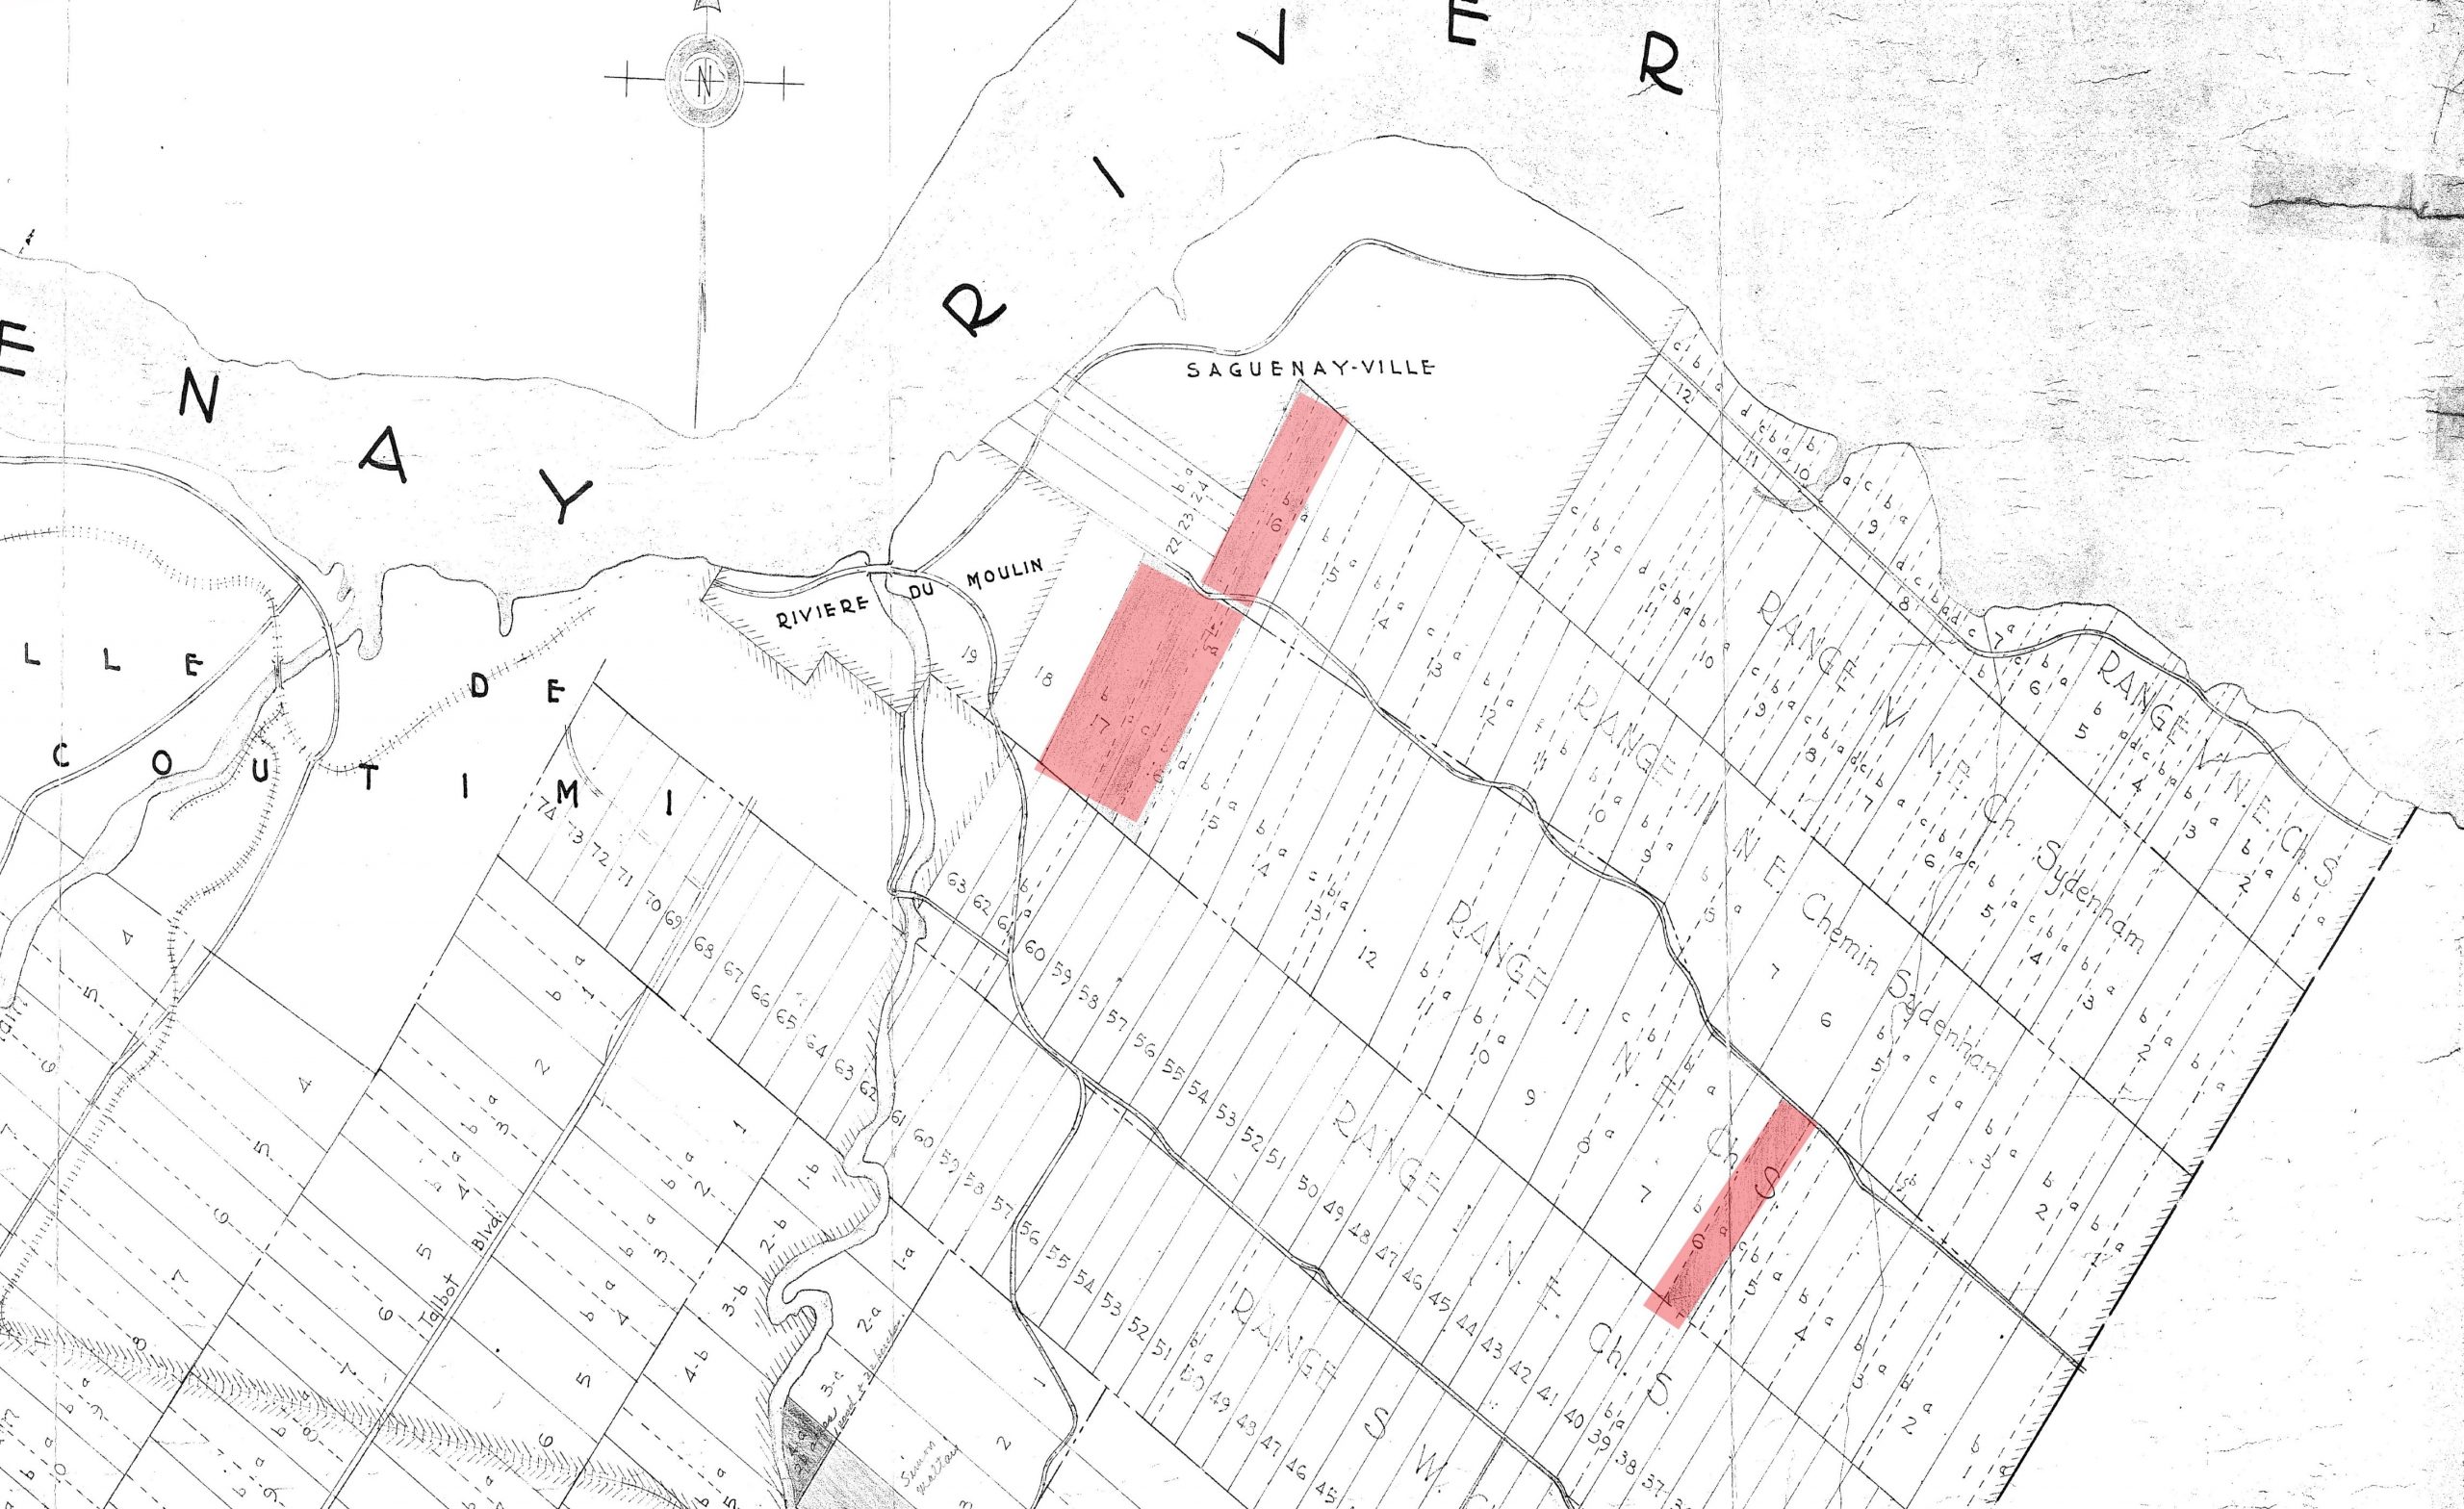 Black and white drawing of land parcels with some sections in red.